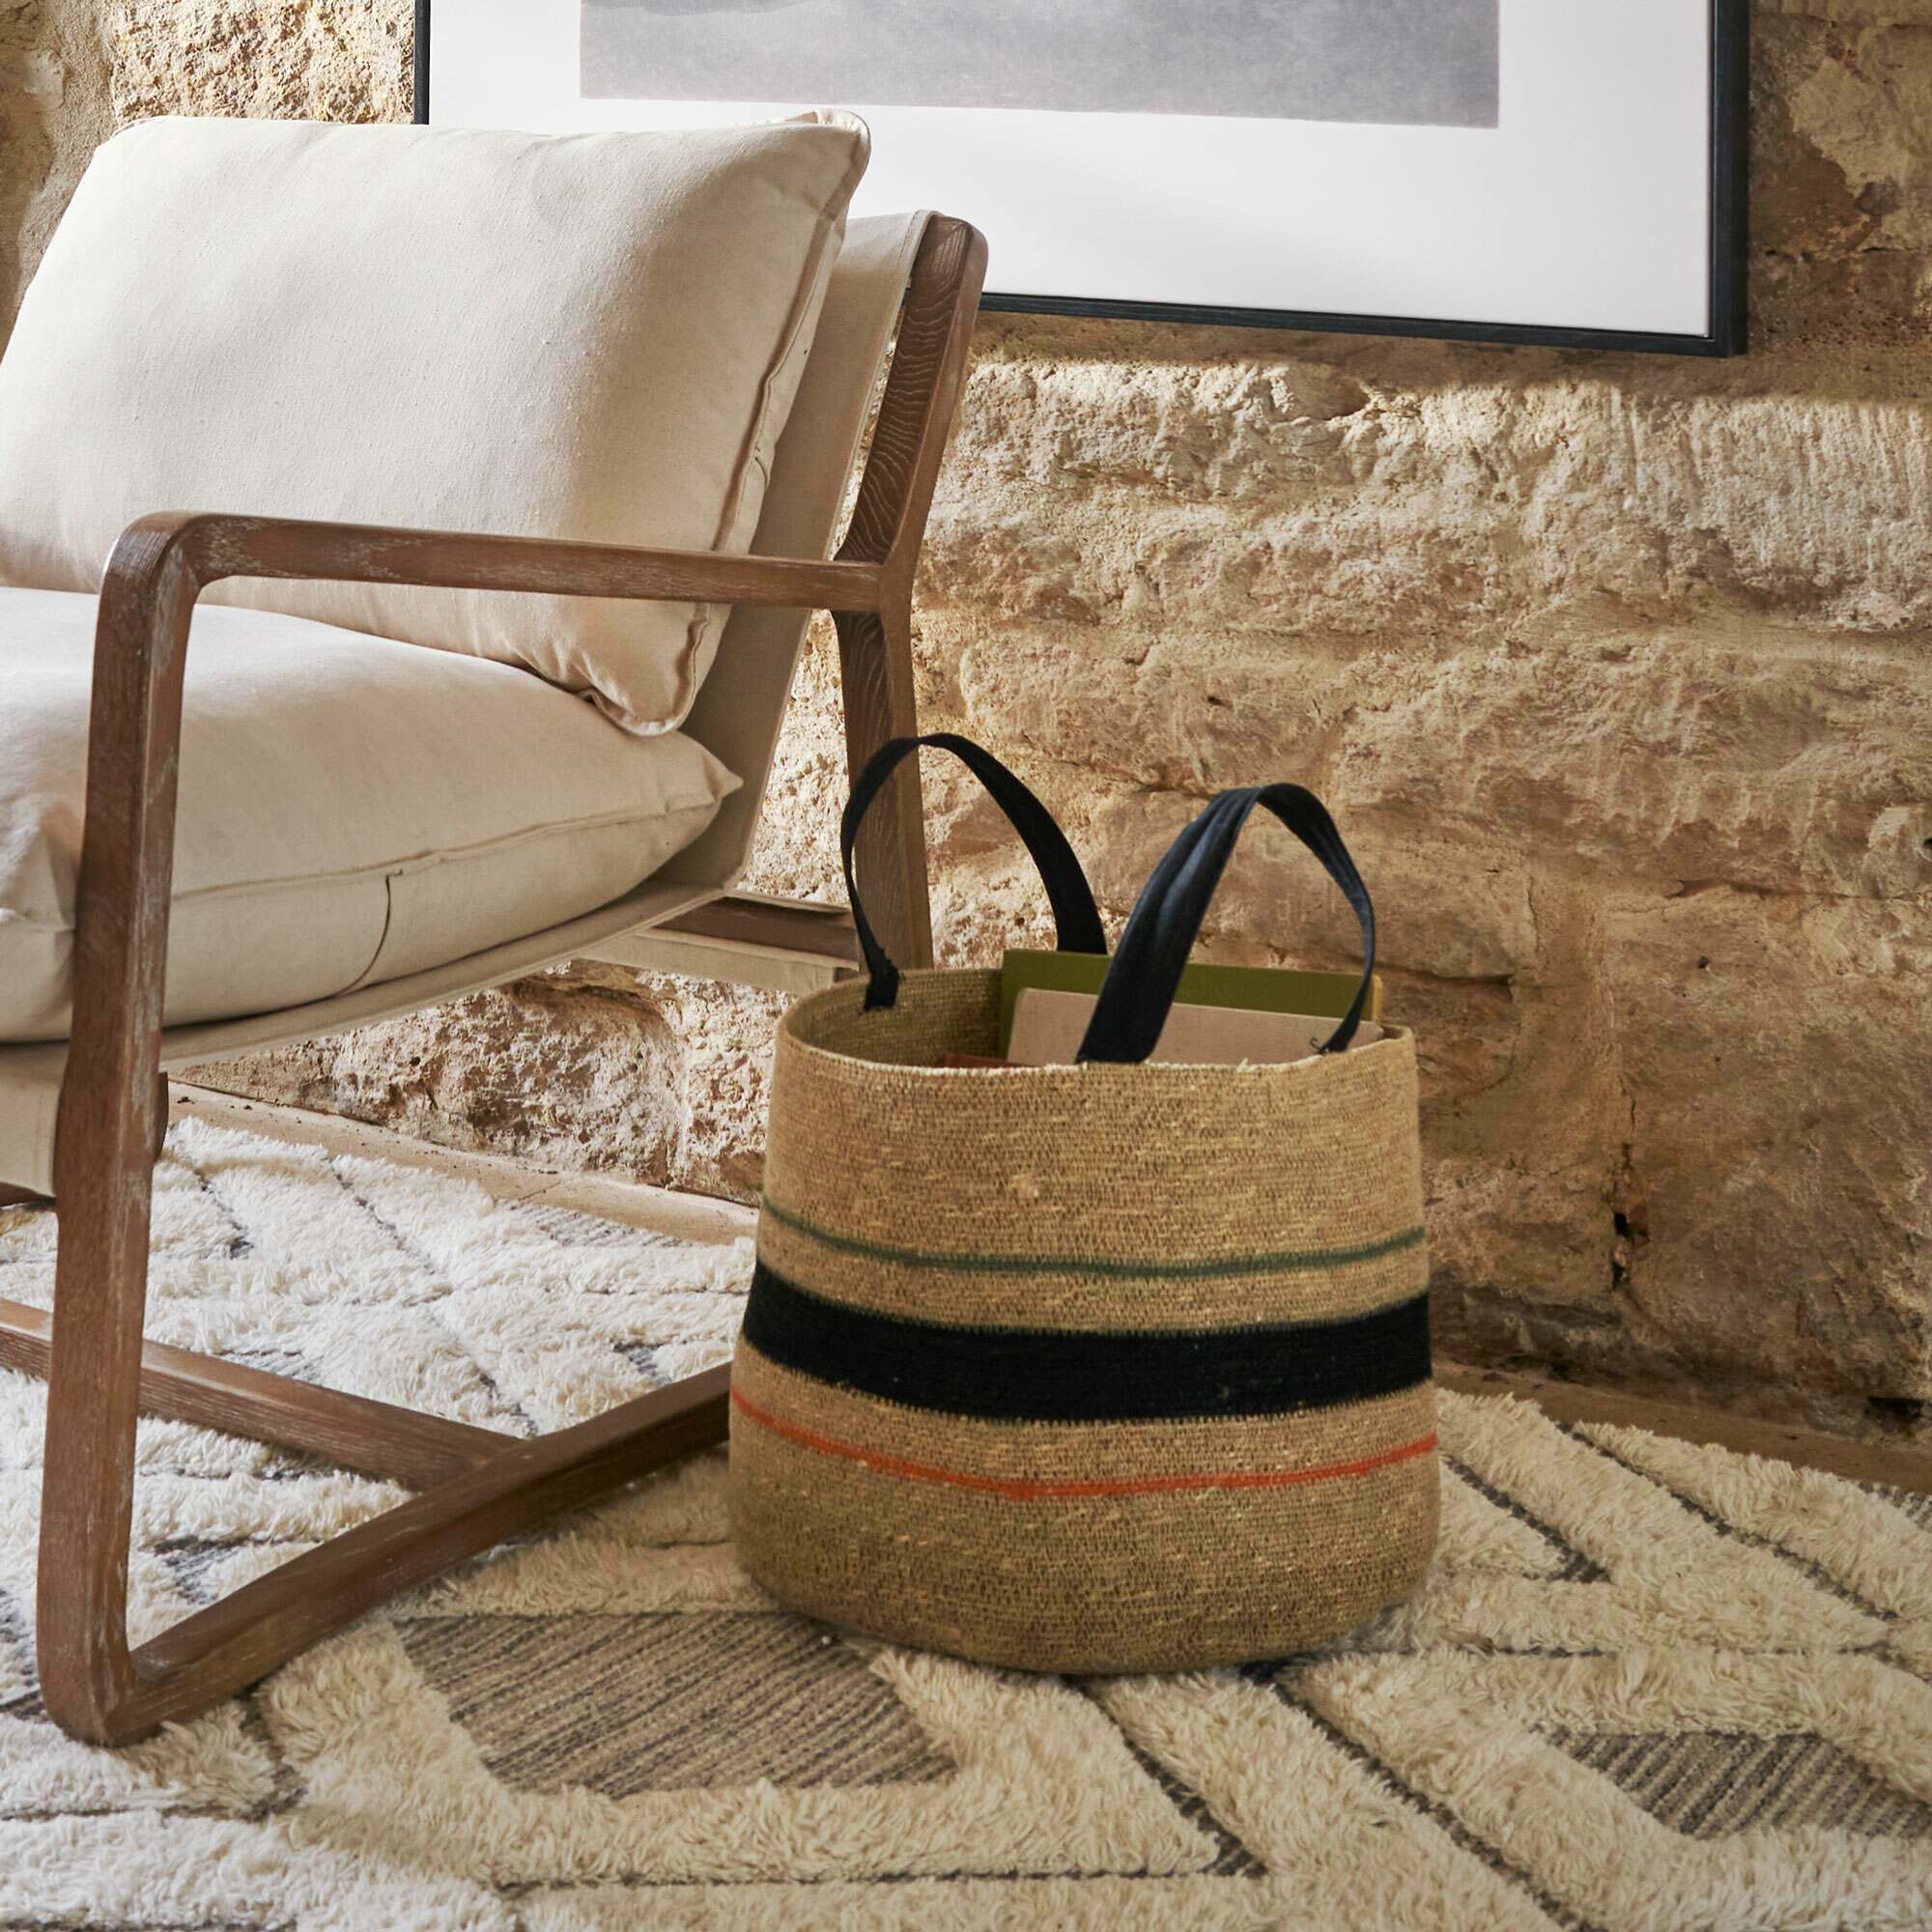 Read more about Graham and green striped seagrass basket with handles